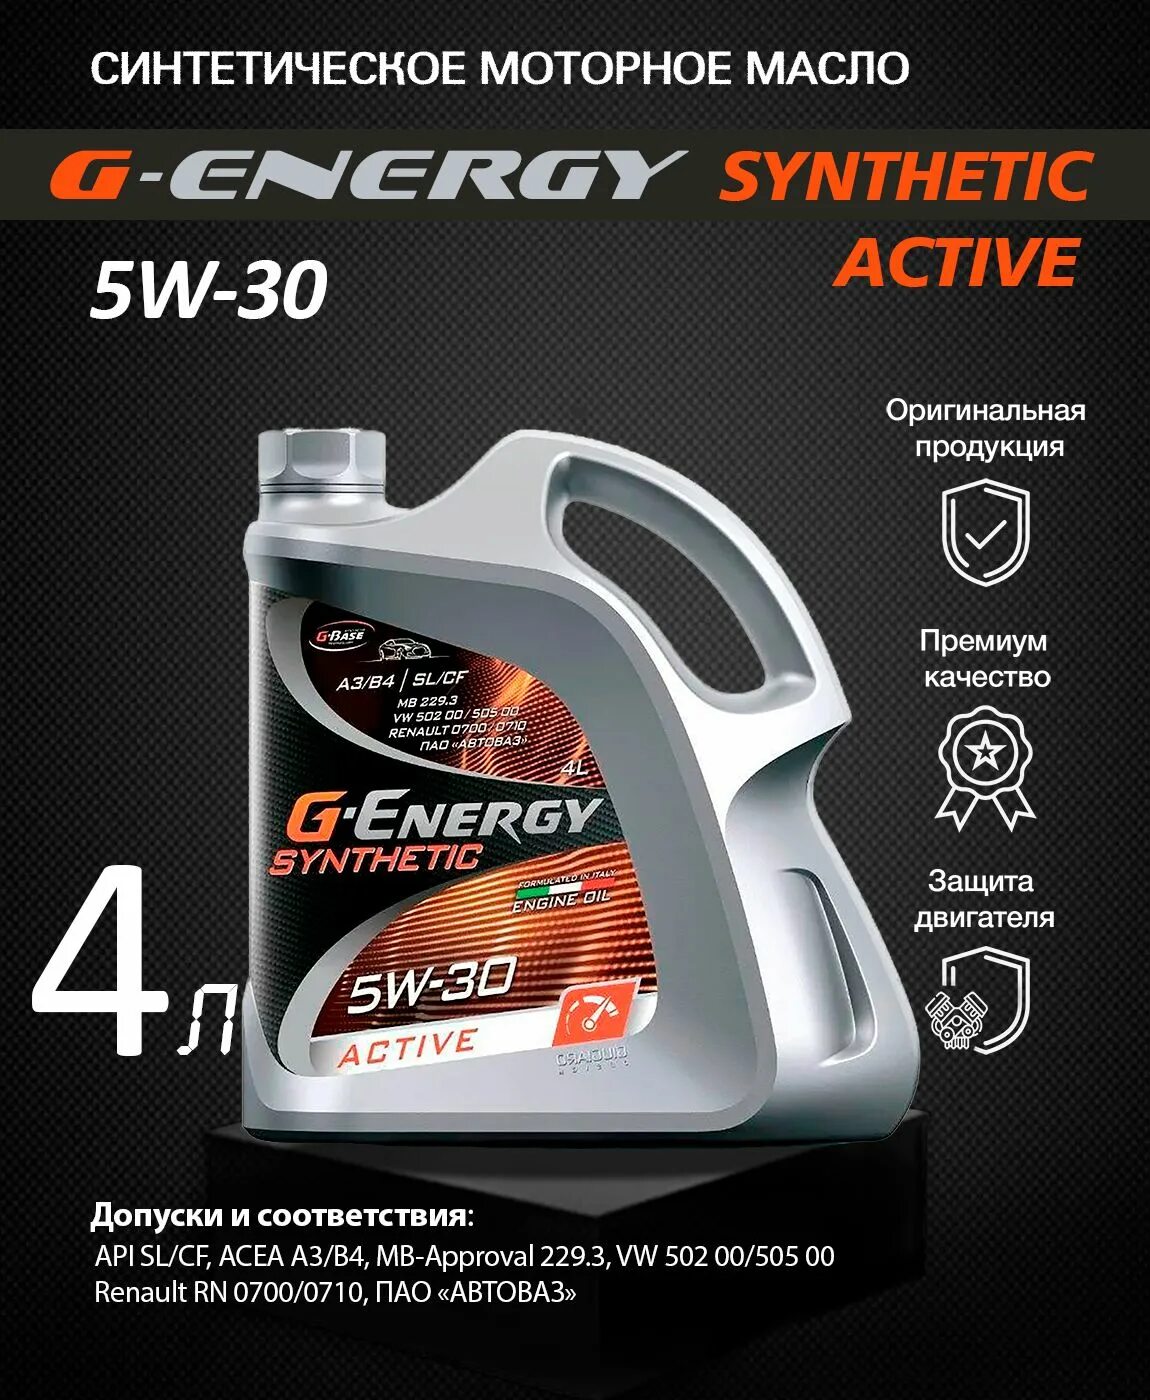 G-Energy Synthetic super start 5w30 4л. G-Energy Synthetic Active 5w30 4л синт.. G-Energy Synthetic far East 5w30 4л 253142415. G-Energy far East синтетика 5w-30. Масло g energy synthetic 5w 30